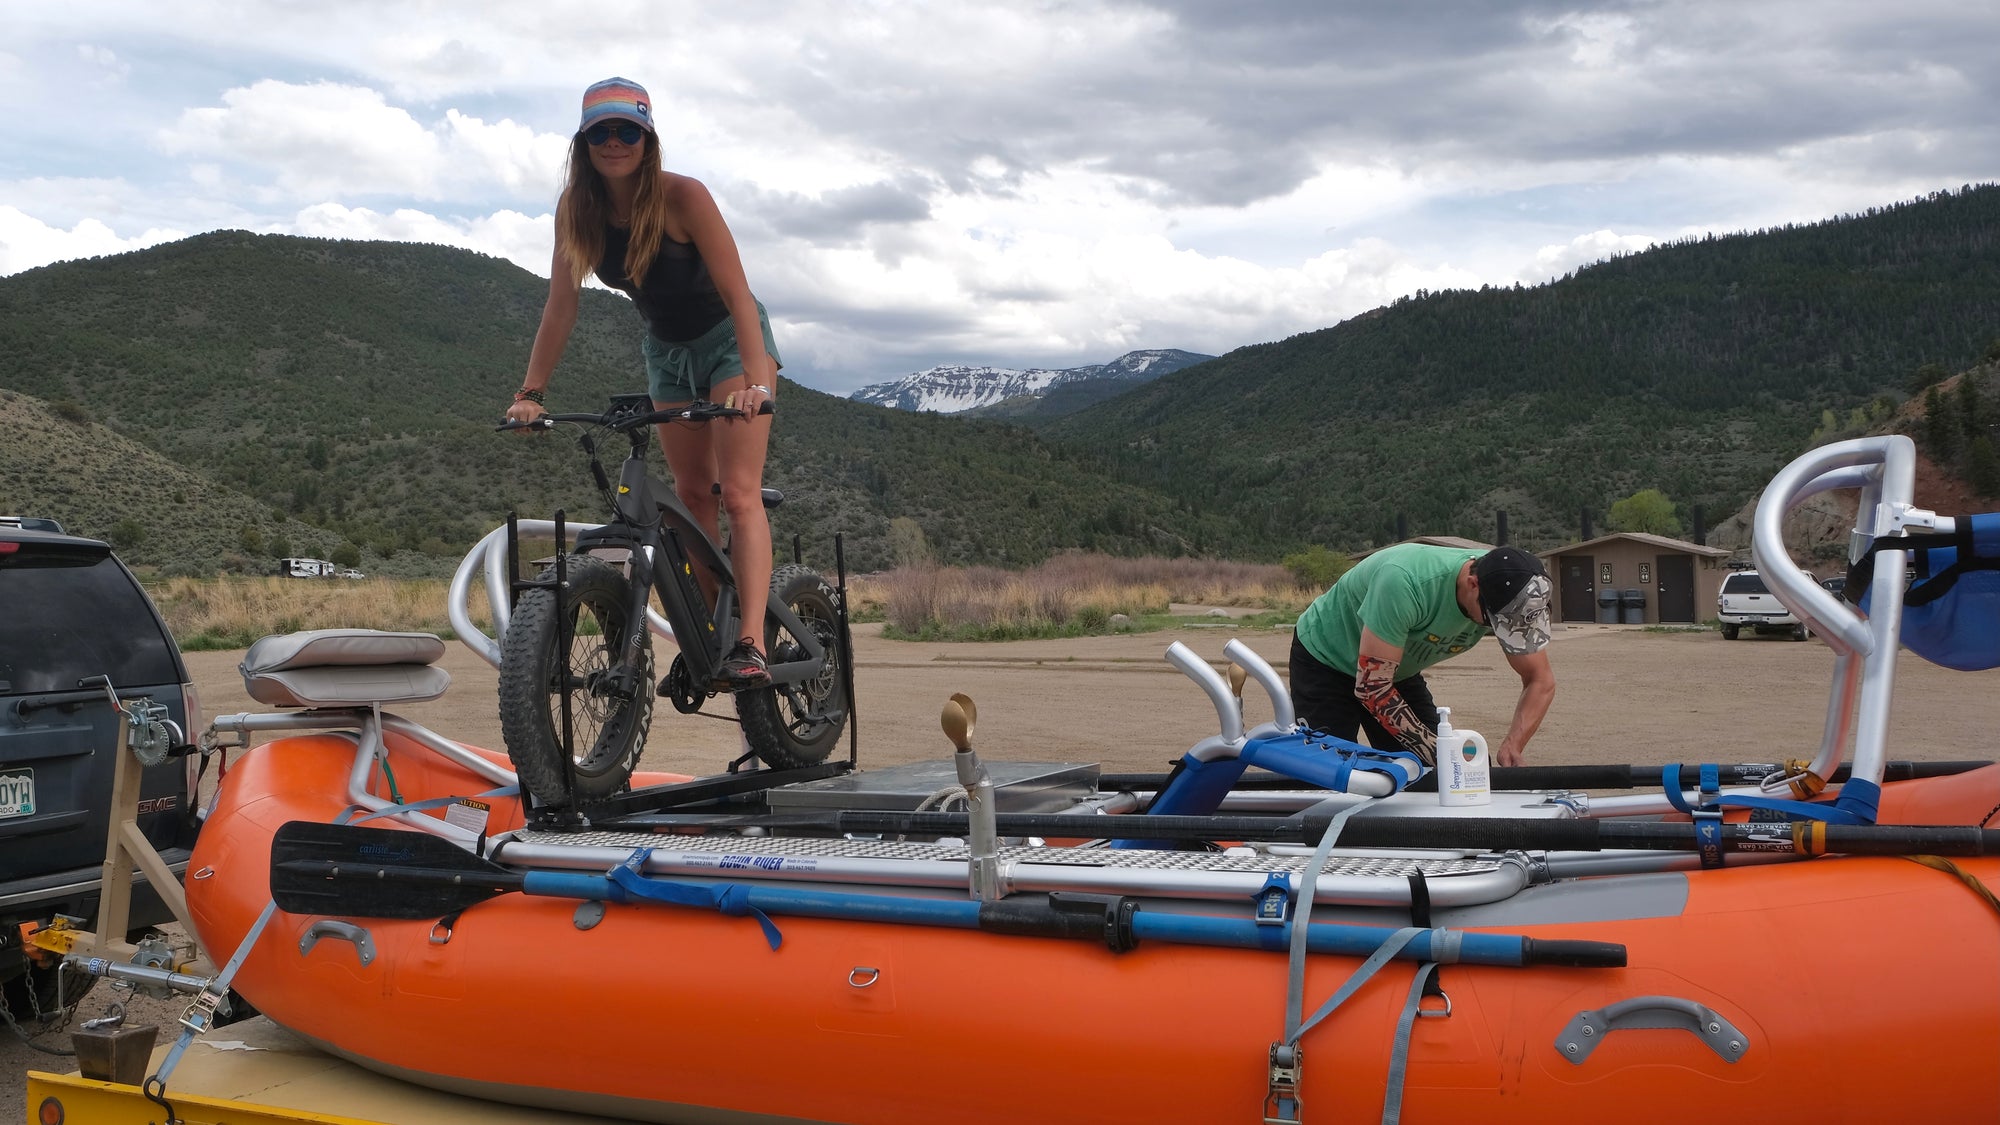 Experience Boating with a QuietKat Electric Bike – QUIETKAT USA